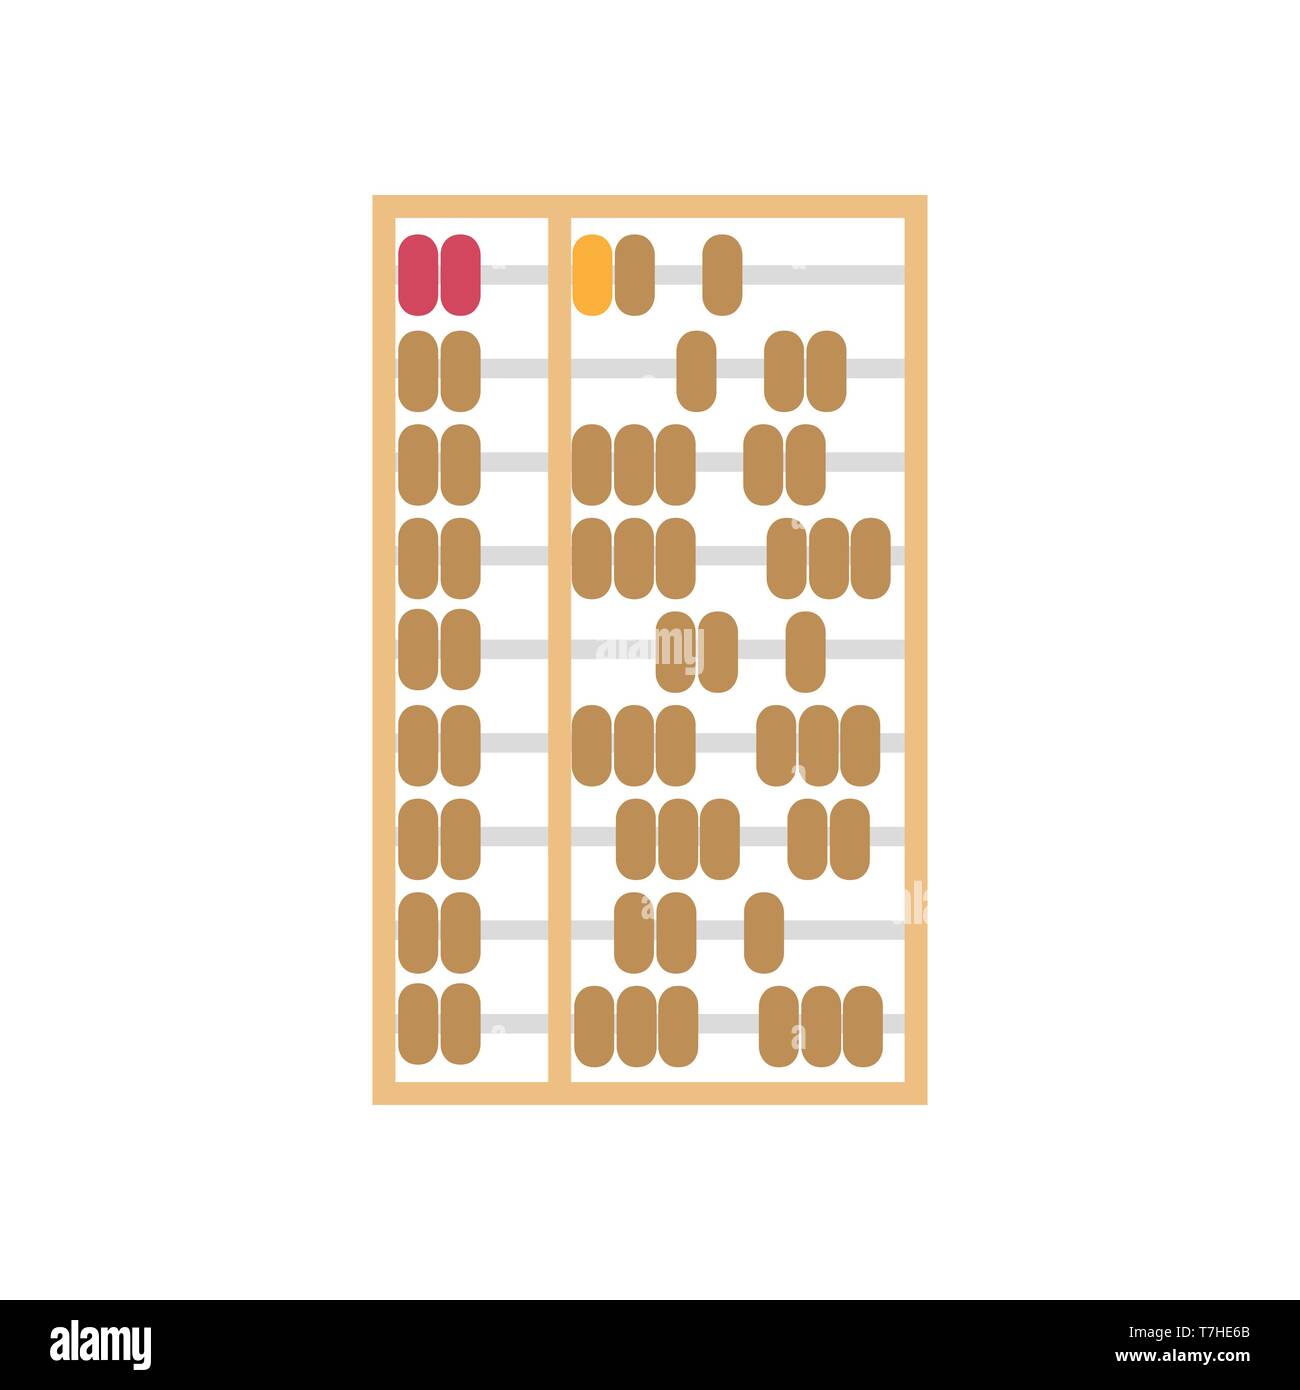 Abacus vector Chinese background illustration. Calculator isolated object wooden antique vintage Stock Vector